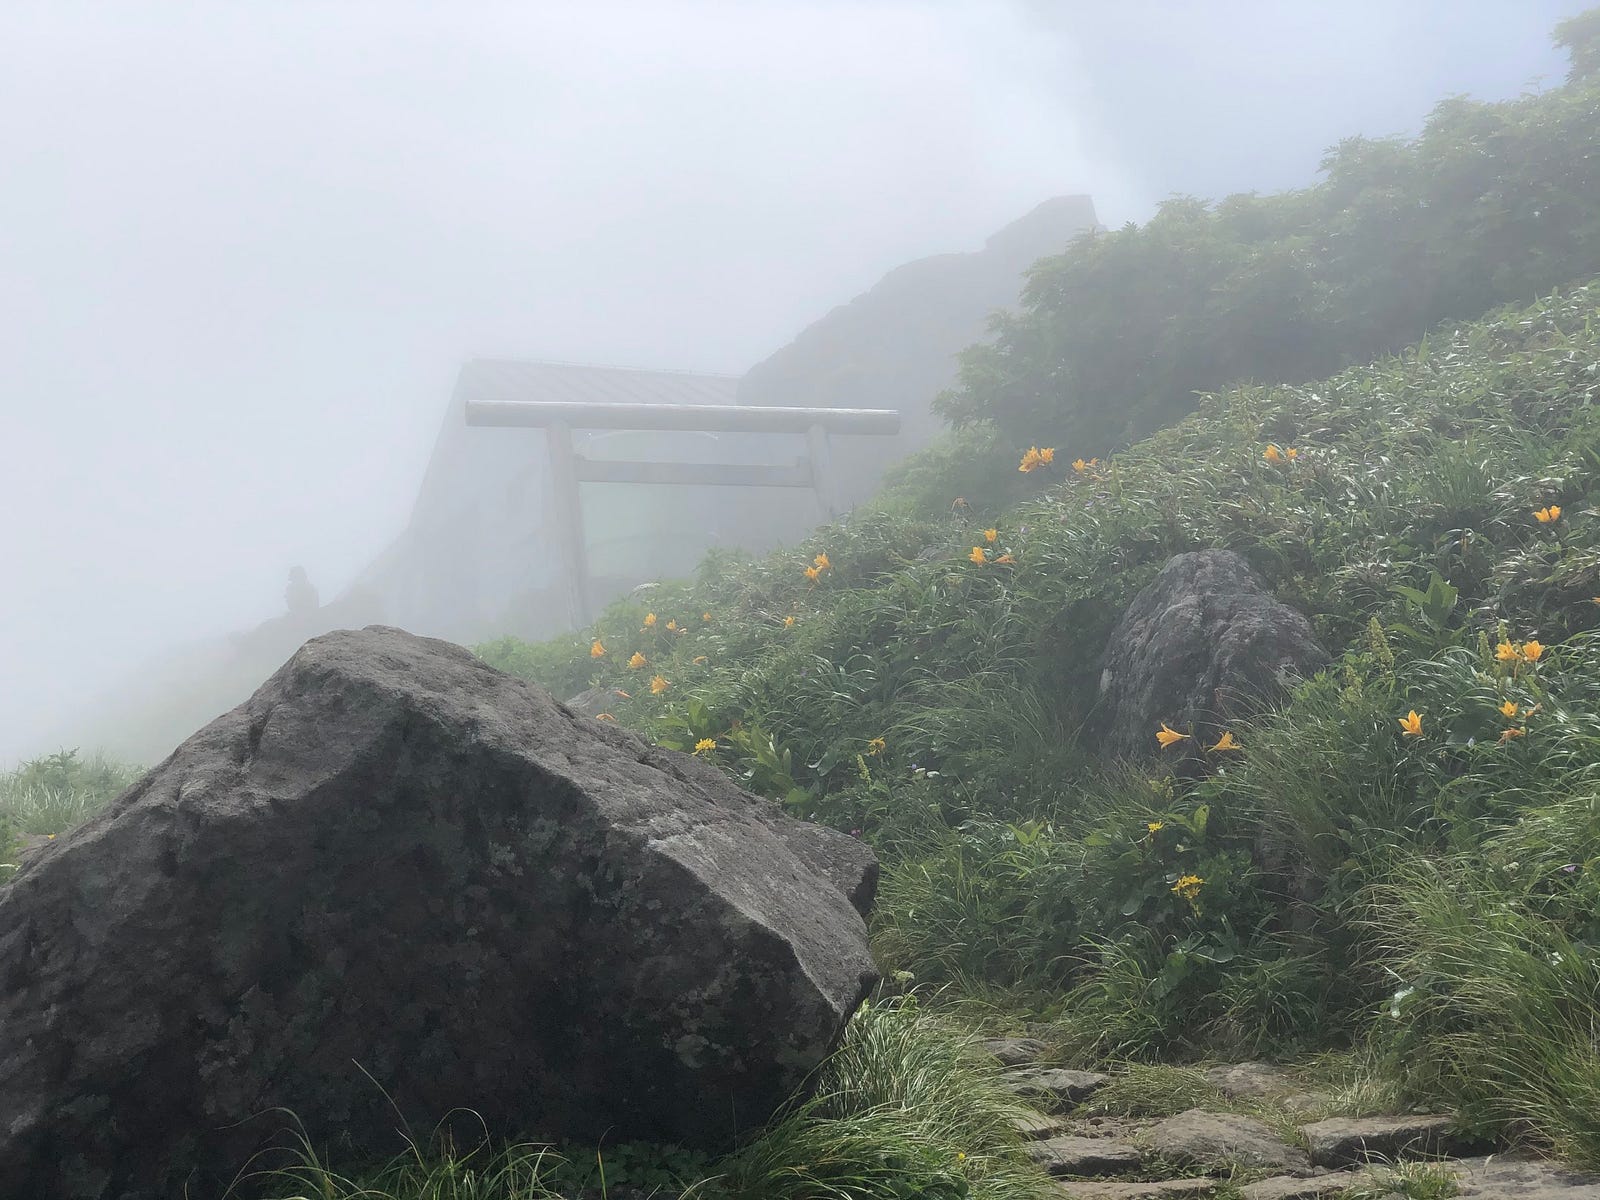 You can barely make out the torii shrine gates at Chokai-san’s crater lake. Chokai-san is one of the 100 Famous Mountains of both Japan, and Yamagata Prefecture.